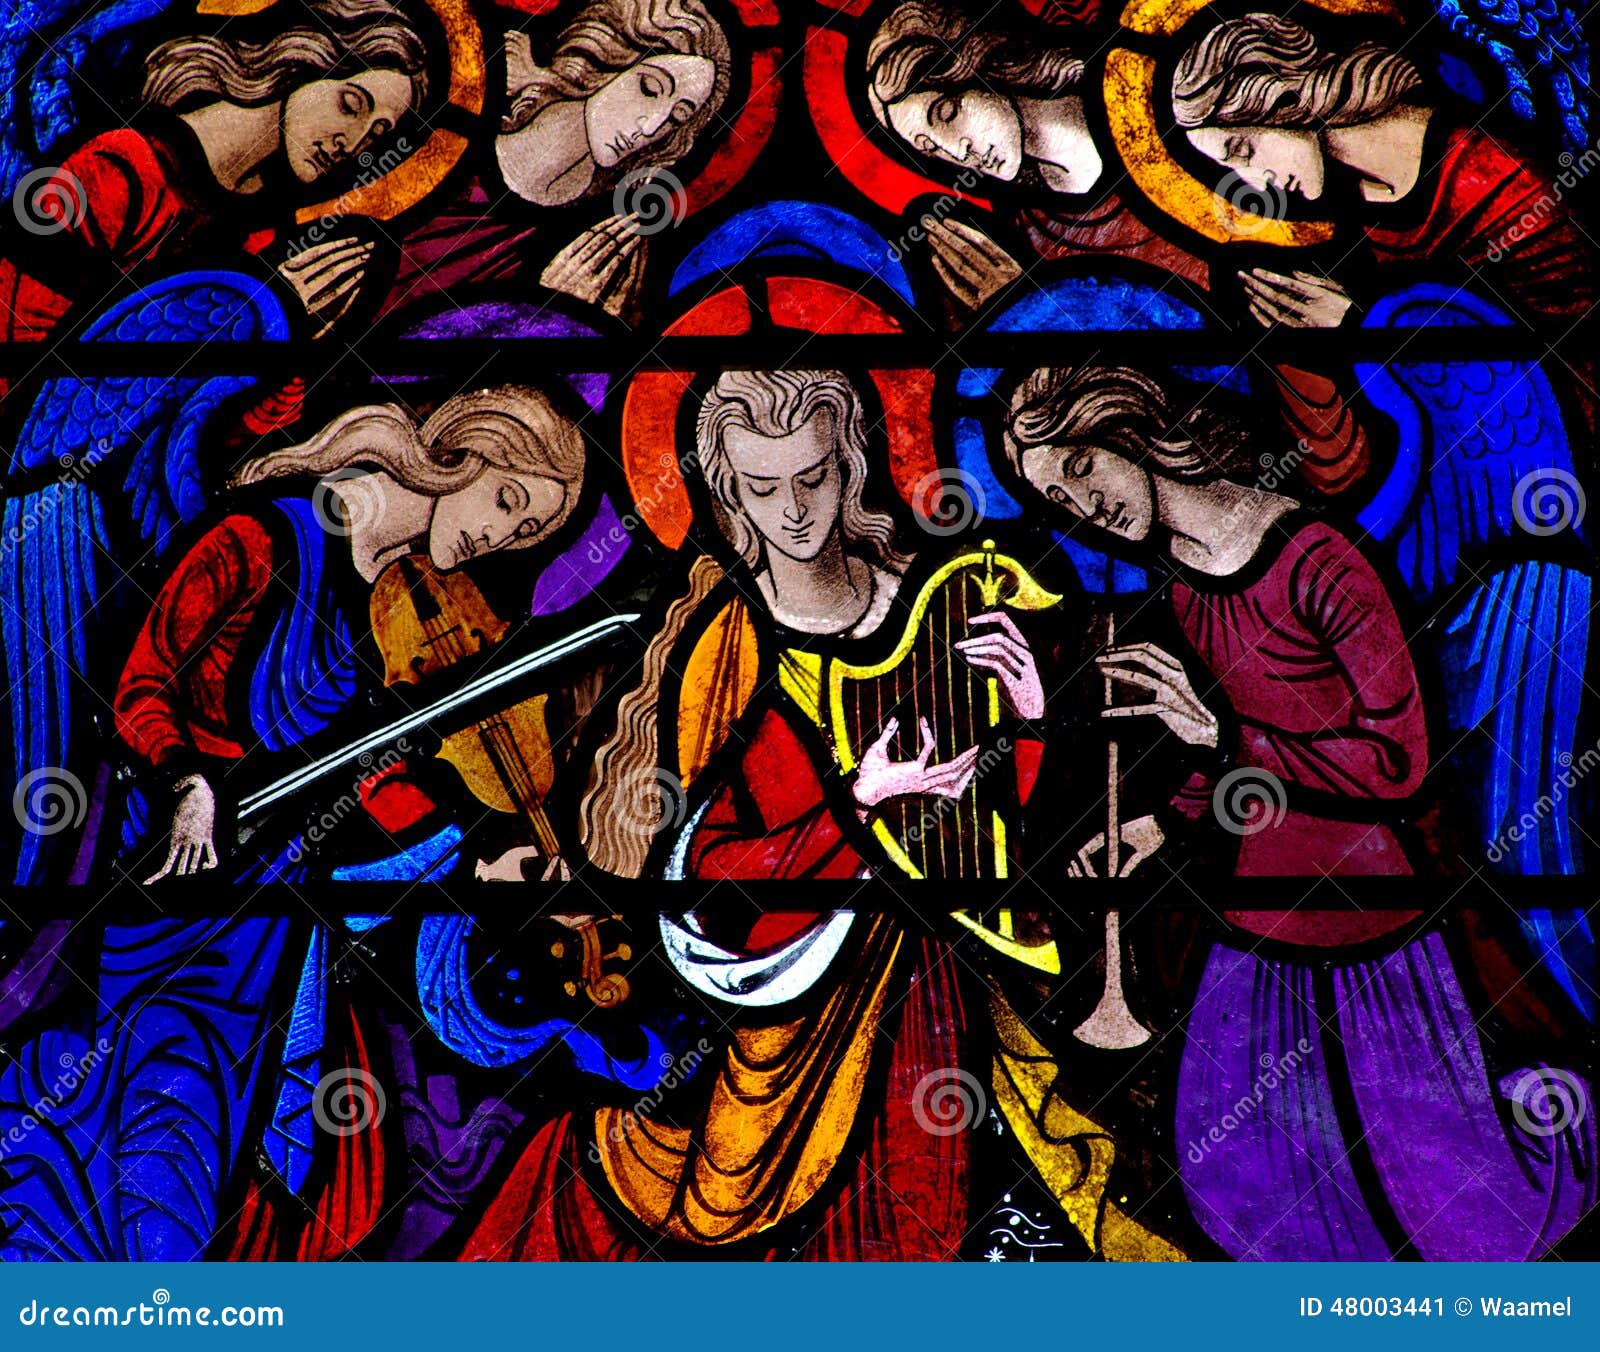 angels making music in stained glass